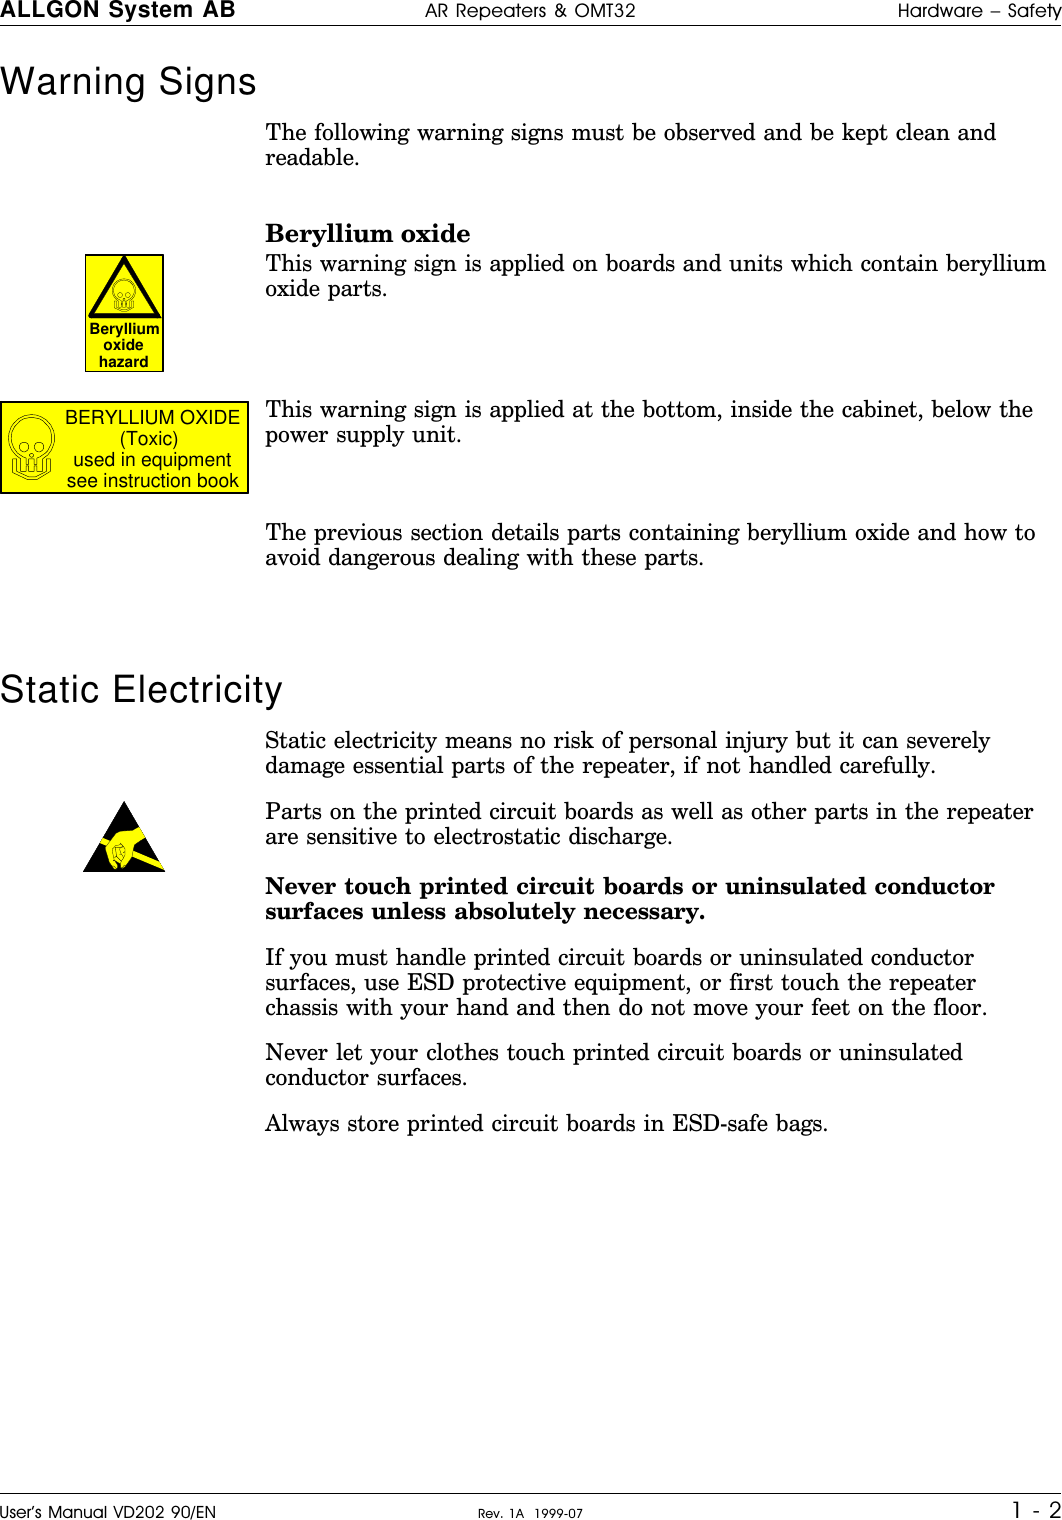 Warning Signs     The following warning signs must be observed and be kept clean andreadable.Beryllium oxideThis warning sign is applied on boards and units which contain berylliumoxide parts.This warning sign is applied at the bottom, inside the cabinet, below thepower supply unit.The previous section details parts containing beryllium oxide and how toavoid dangerous dealing with these parts.Static ElectricityStatic electricity means no risk of personal injury but it can severelydamage essential parts of the repeater, if not handled carefully.Parts on the printed circuit boards as well as other parts in the repeaterare sensitive to electrostatic discharge.Never touch printed circuit boards or uninsulated conductorsurfaces unless absolutely necessary.If you must handle printed circuit boards or uninsulated conductorsurfaces, use ESD protective equipment, or first touch the repeaterchassis with your hand and then do not move your feet on the floor.Never let your clothes touch printed circuit boards or uninsulatedconductor surfaces.Always store printed circuit boards in ESD-safe bags.BerylliumoxidehazardBERYLLIUM OXIDE(Toxic)used in equipmentsee instruction bookALLGON System AB AR Repeaters &amp; OMT32 Hardware – SafetyUser’s Manual VD202 90/EN Rev. 1A  1999-07 1 - 2